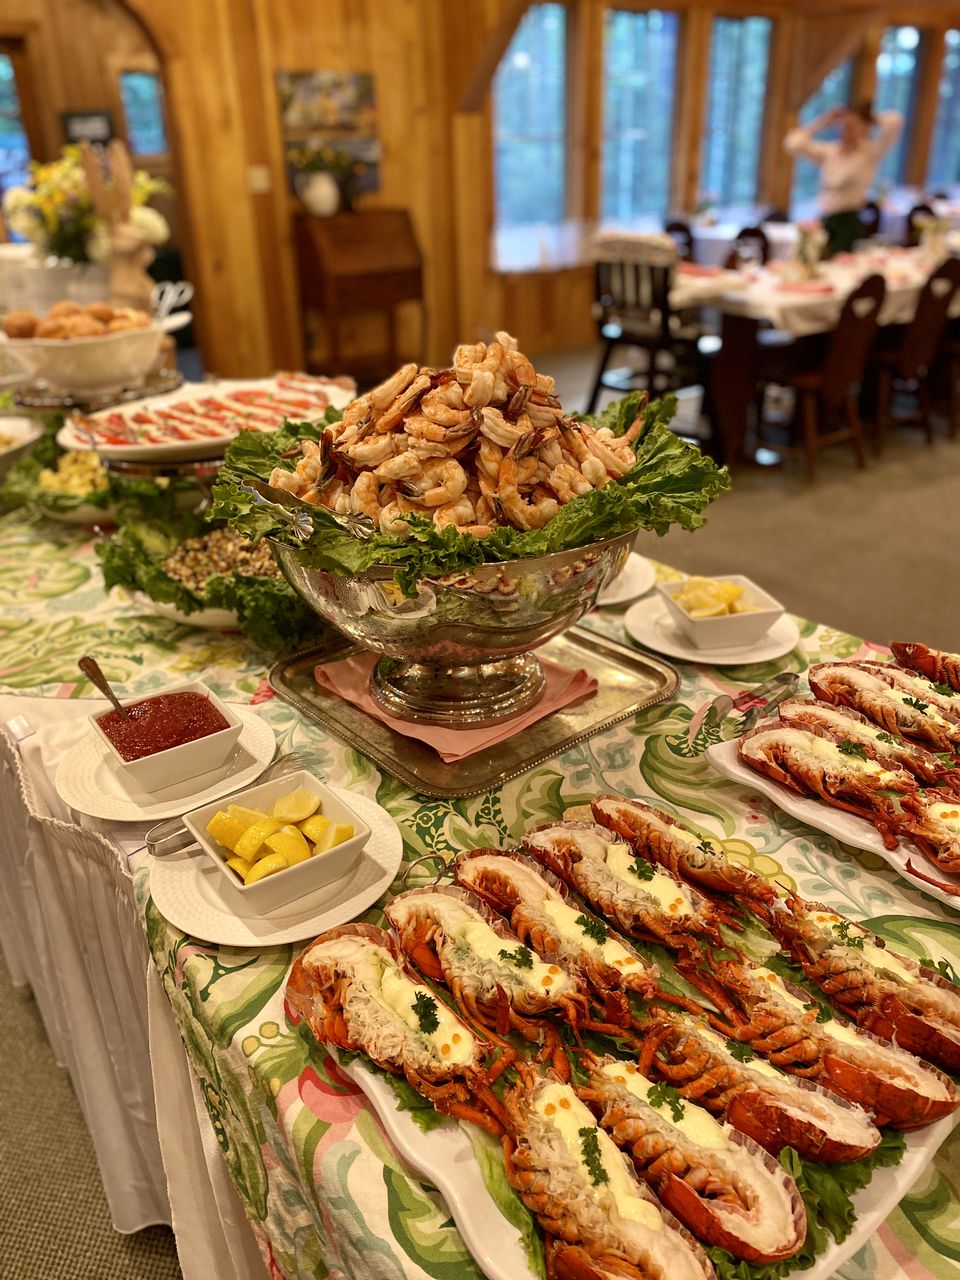 Every Sunday Chef Vogel and his team prepare a seafood buffet for guests.